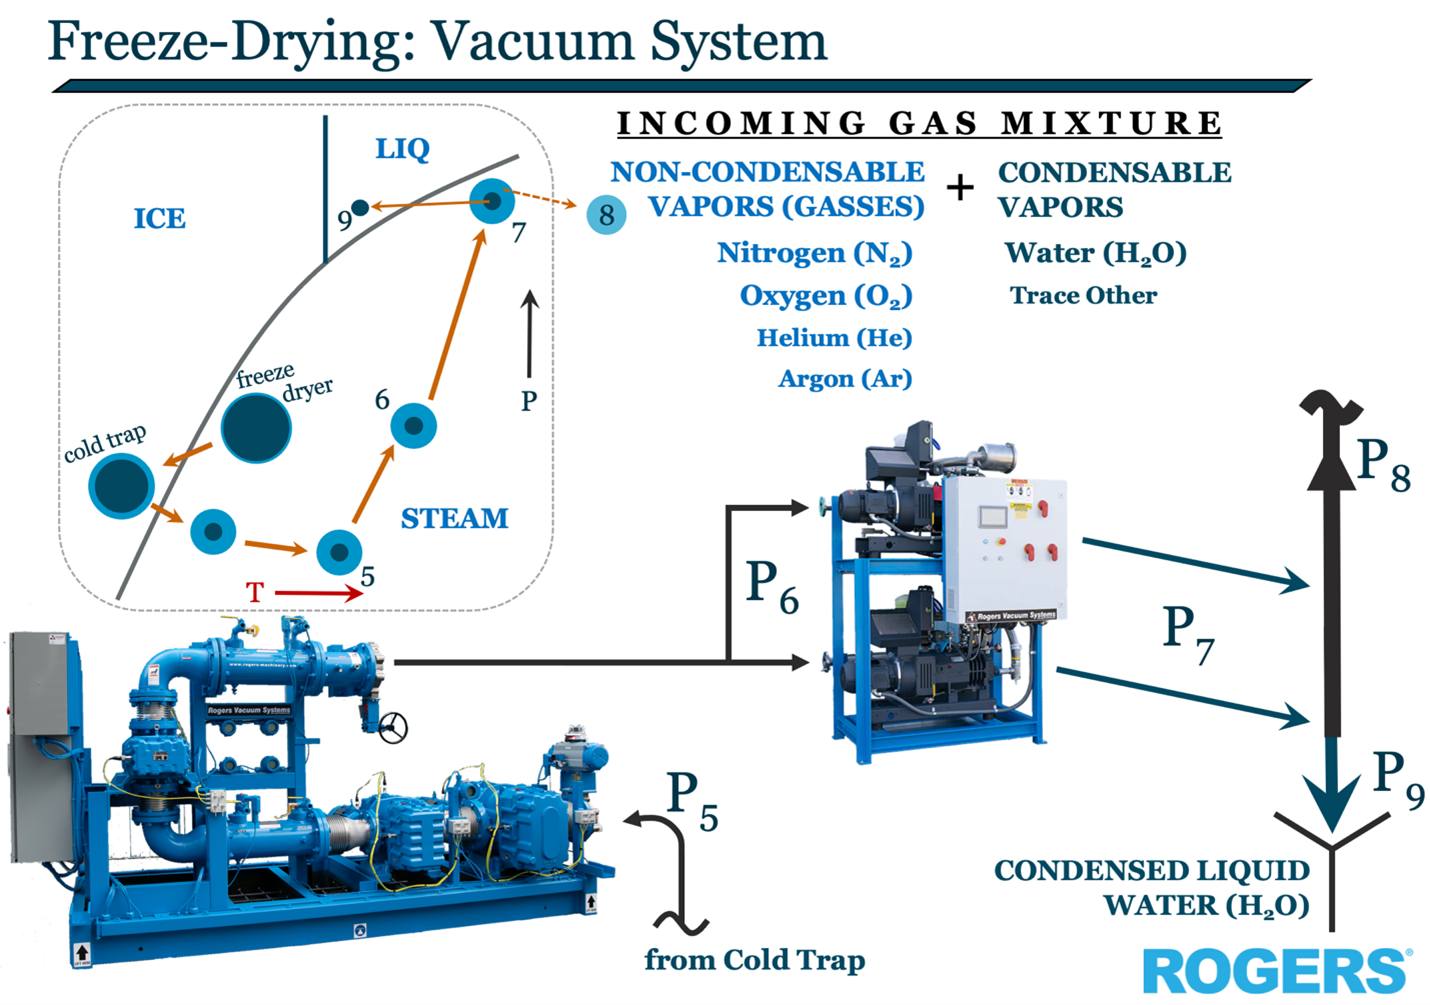 a chart of the freeze-drying vacuum system